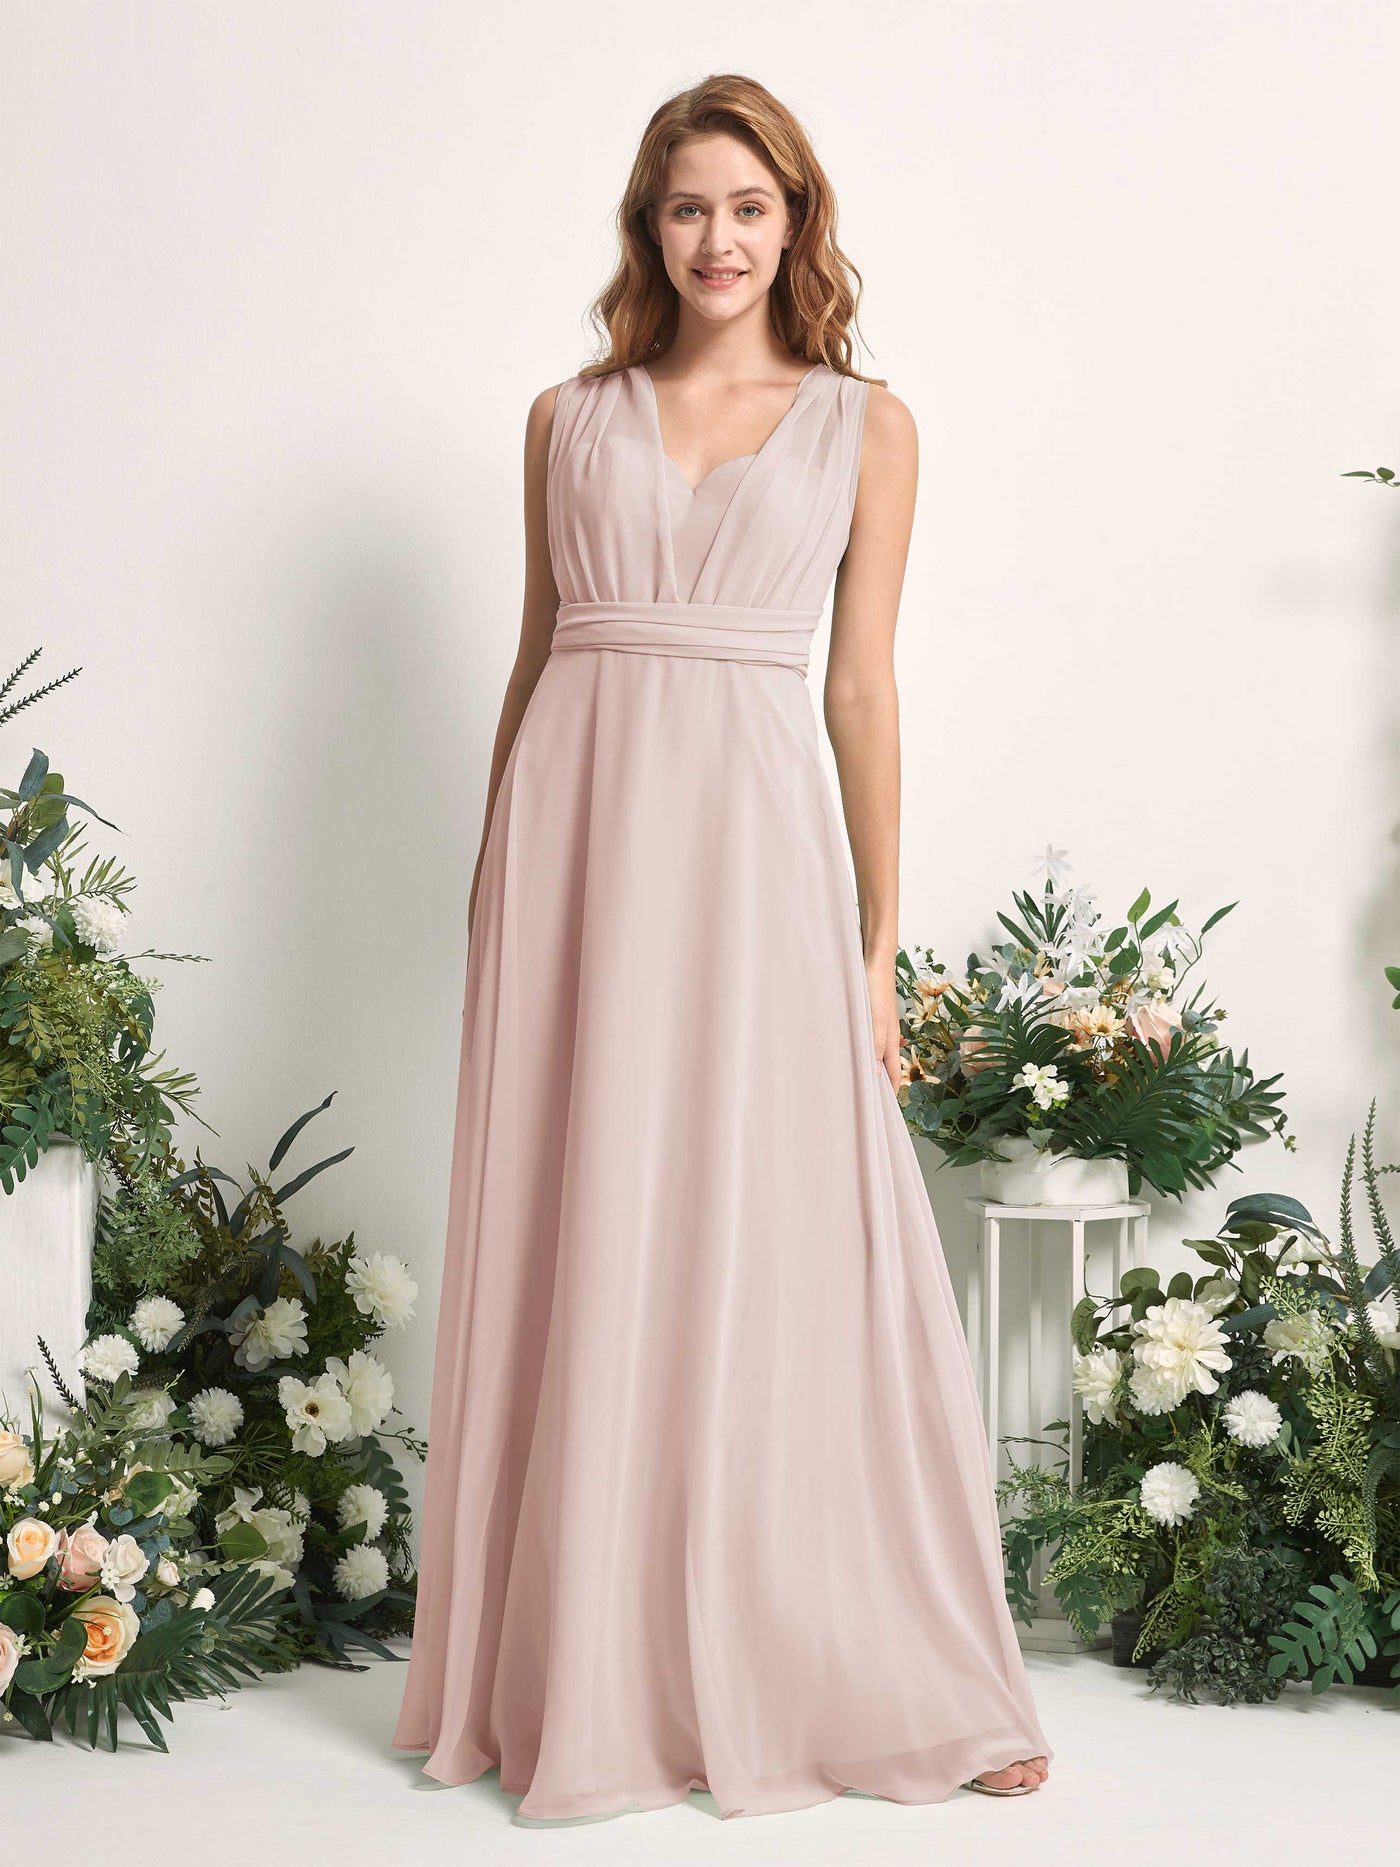 Biscotti Bridesmaid Dresses Bridesmaid Dress A-line Chiffon Halter Full Length Short Sleeves Wedding Party Dress (81226335)#color_biscotti